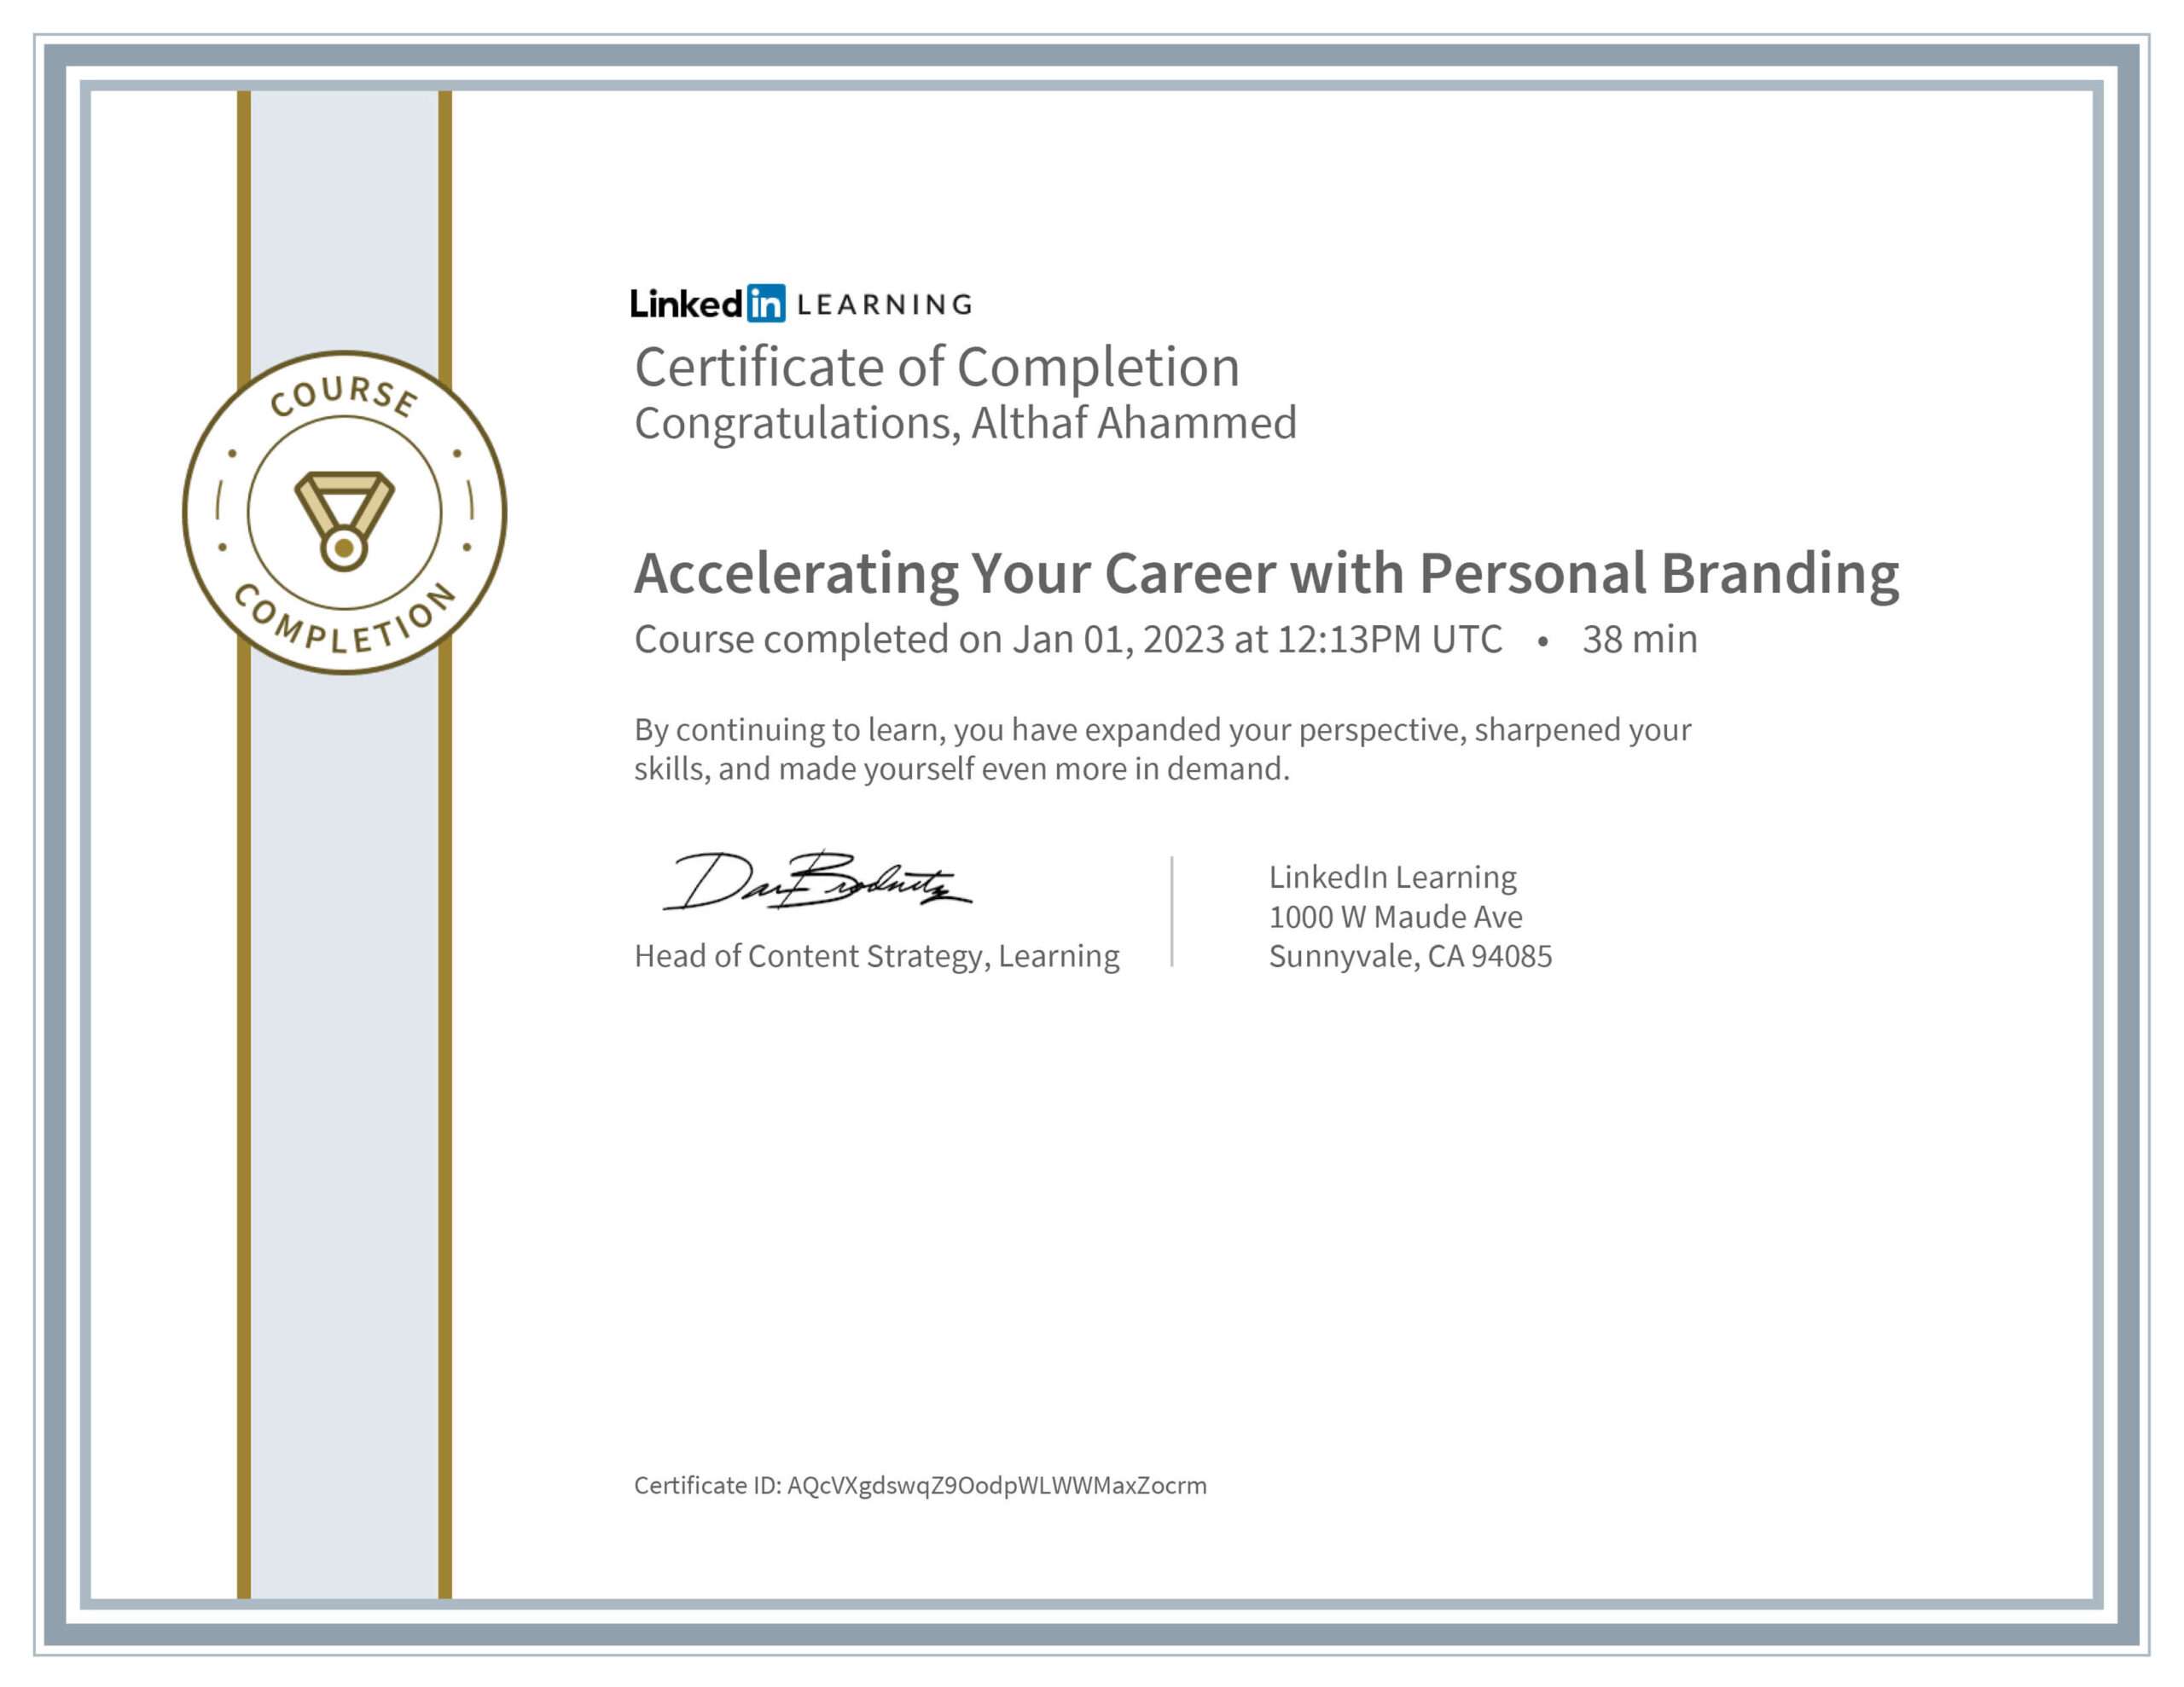 Accelerating Your Career with Personal Branding